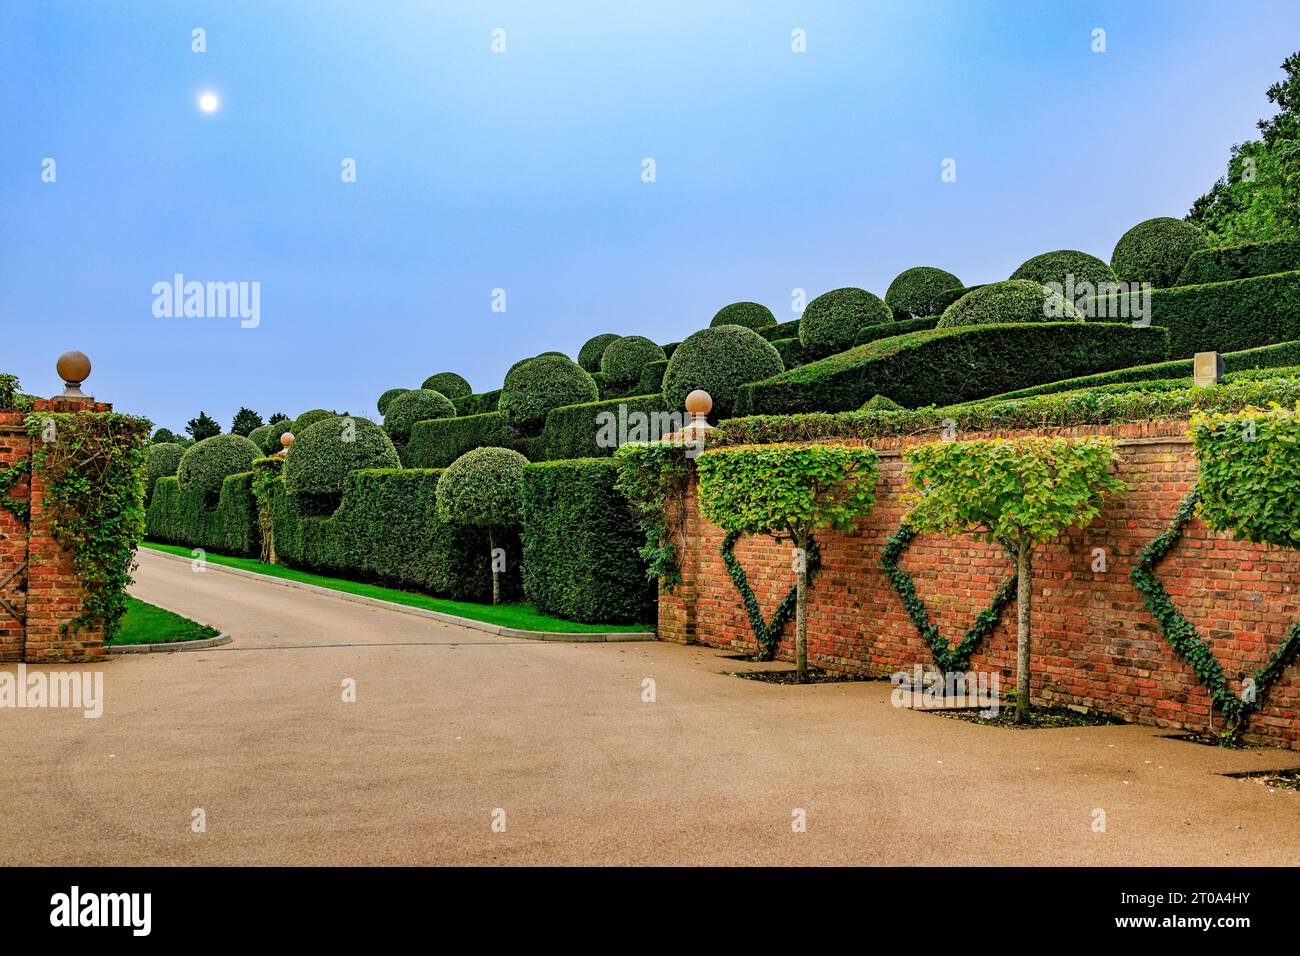 The meticulously and neatly shaped pear trees and yew hedges in the gardens of The Old Hall Hotel near Ely, Cambridgeshire, England, UK Stock Photo